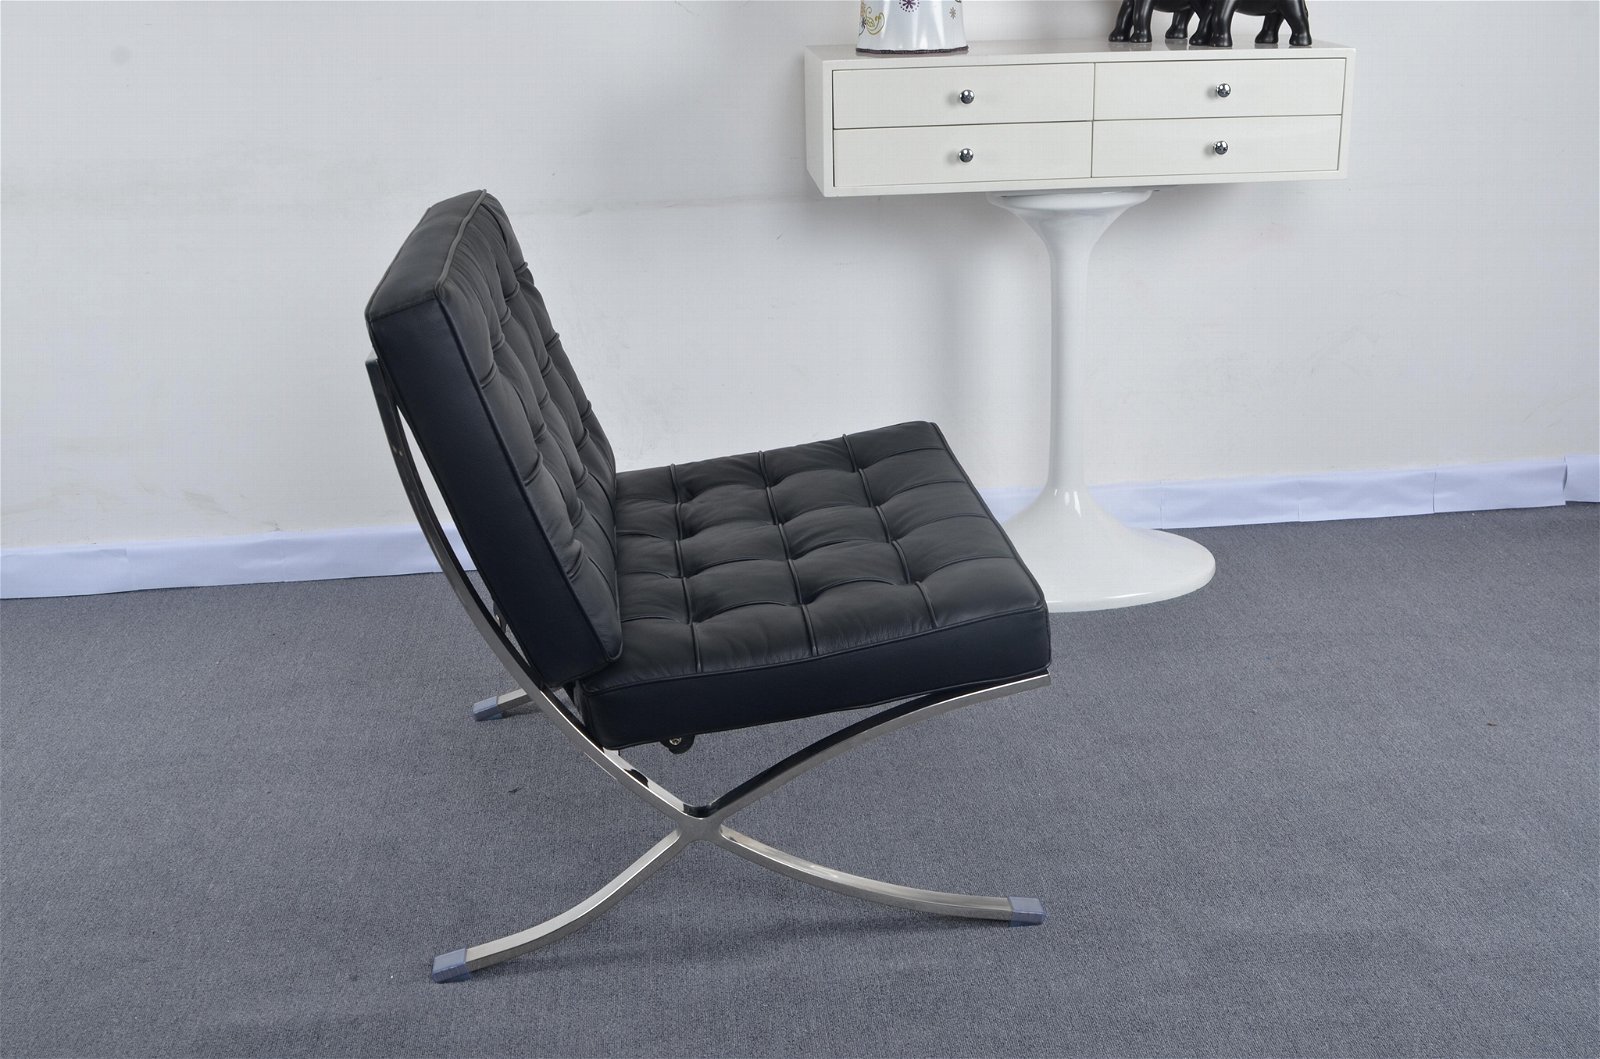 Stainless steel frame leather mies van der rohe barcelona chair 5